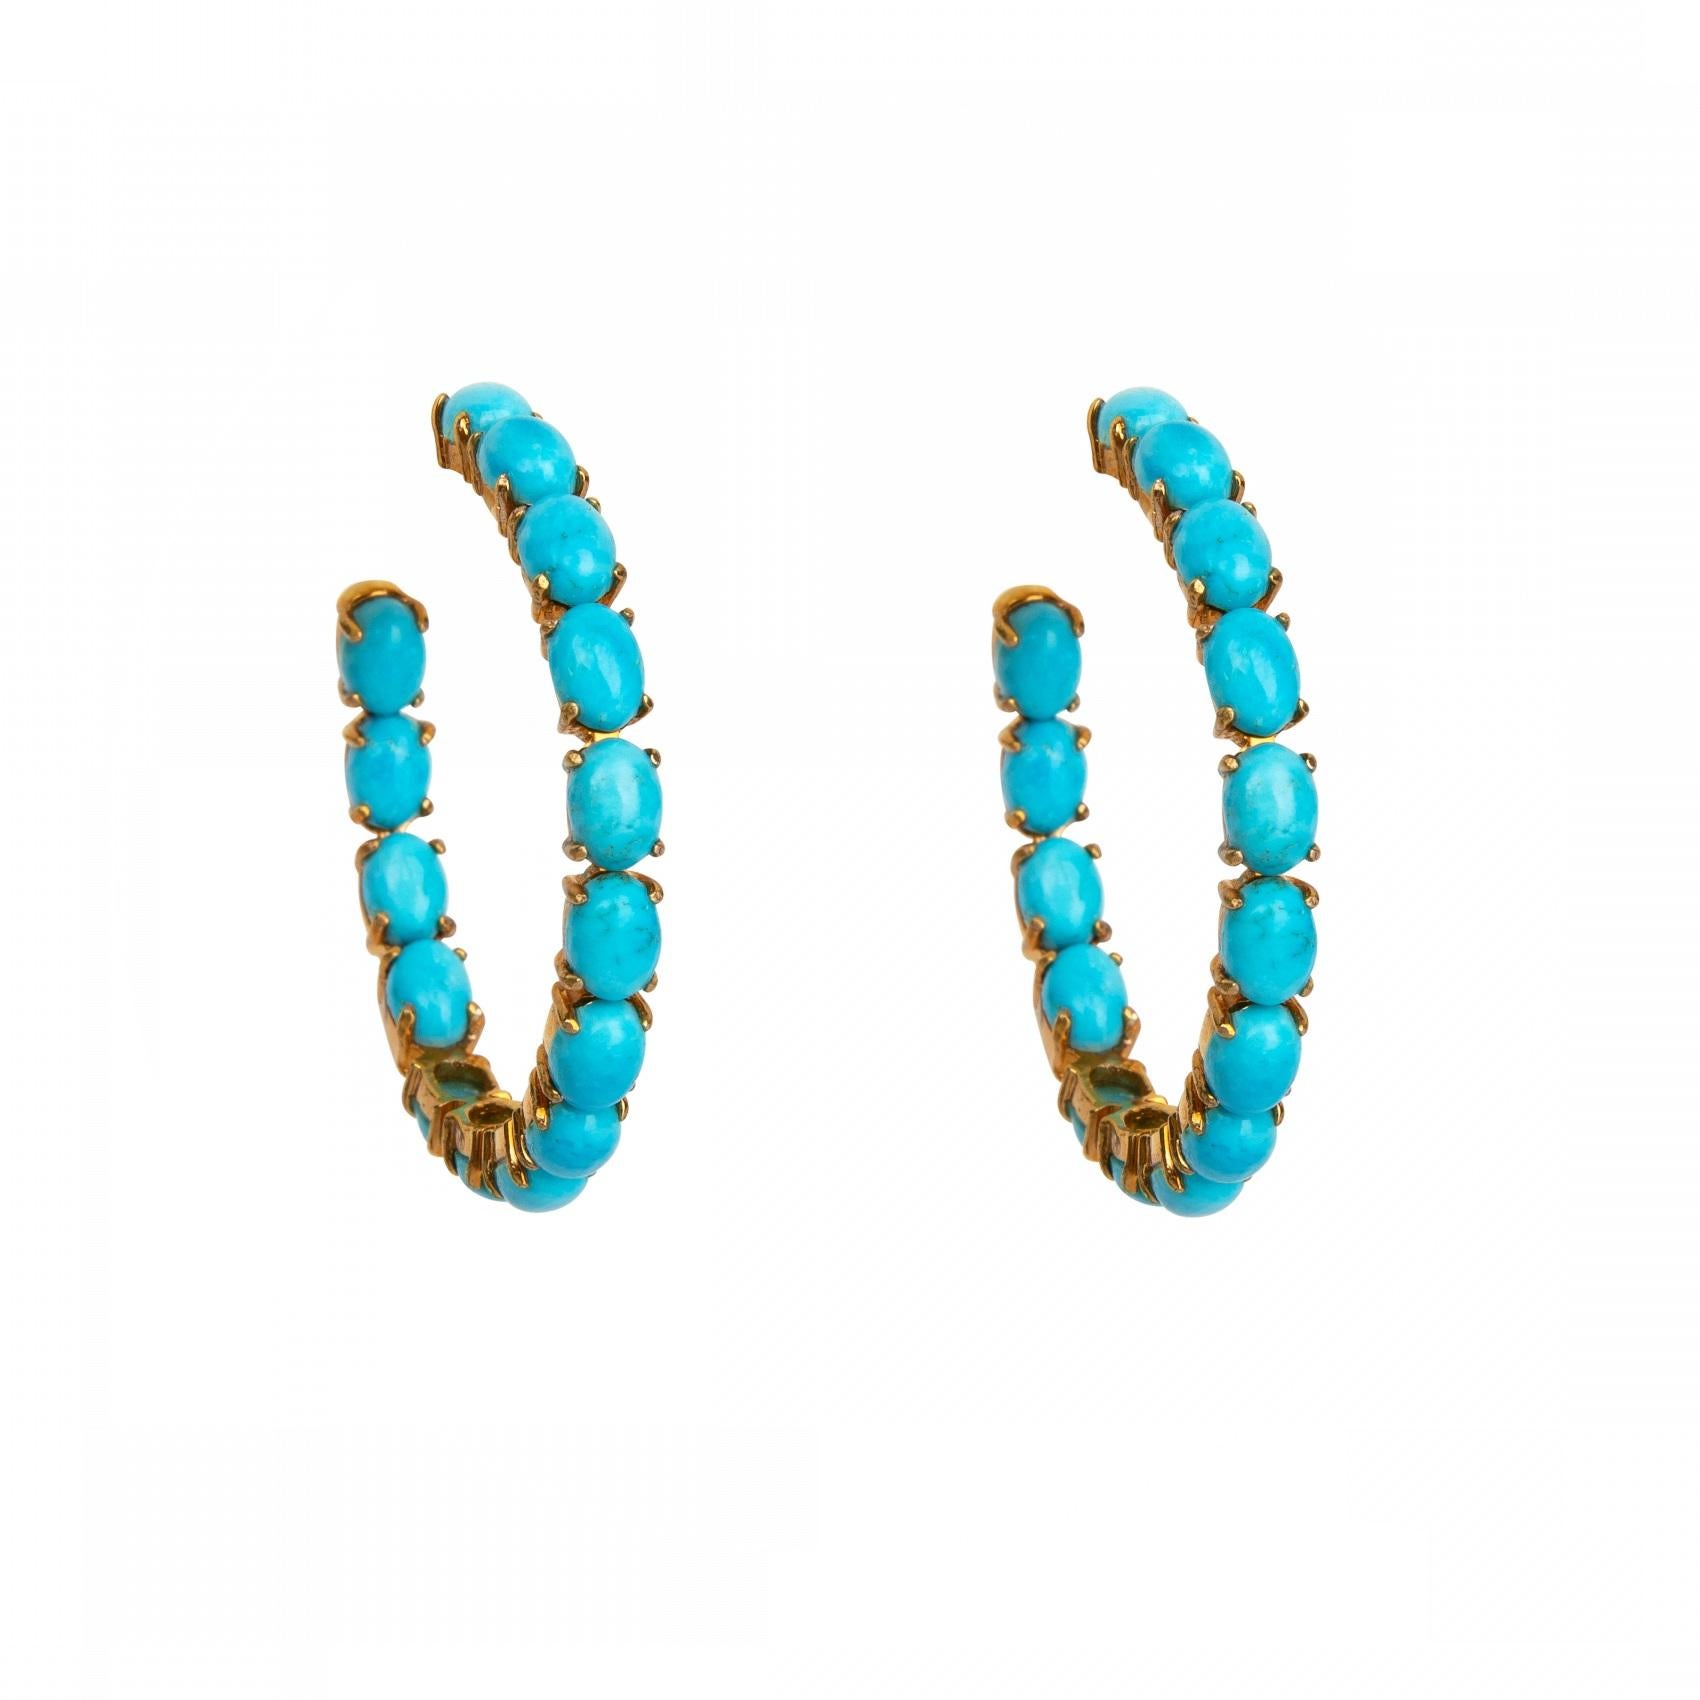 These classic hoops are meticulously crafted from exquisite semi-precious stones, and their post butterfly closure ensures both security and comfort. Lightweight and versatile, they are the perfect choice to elevate your style with a touch of